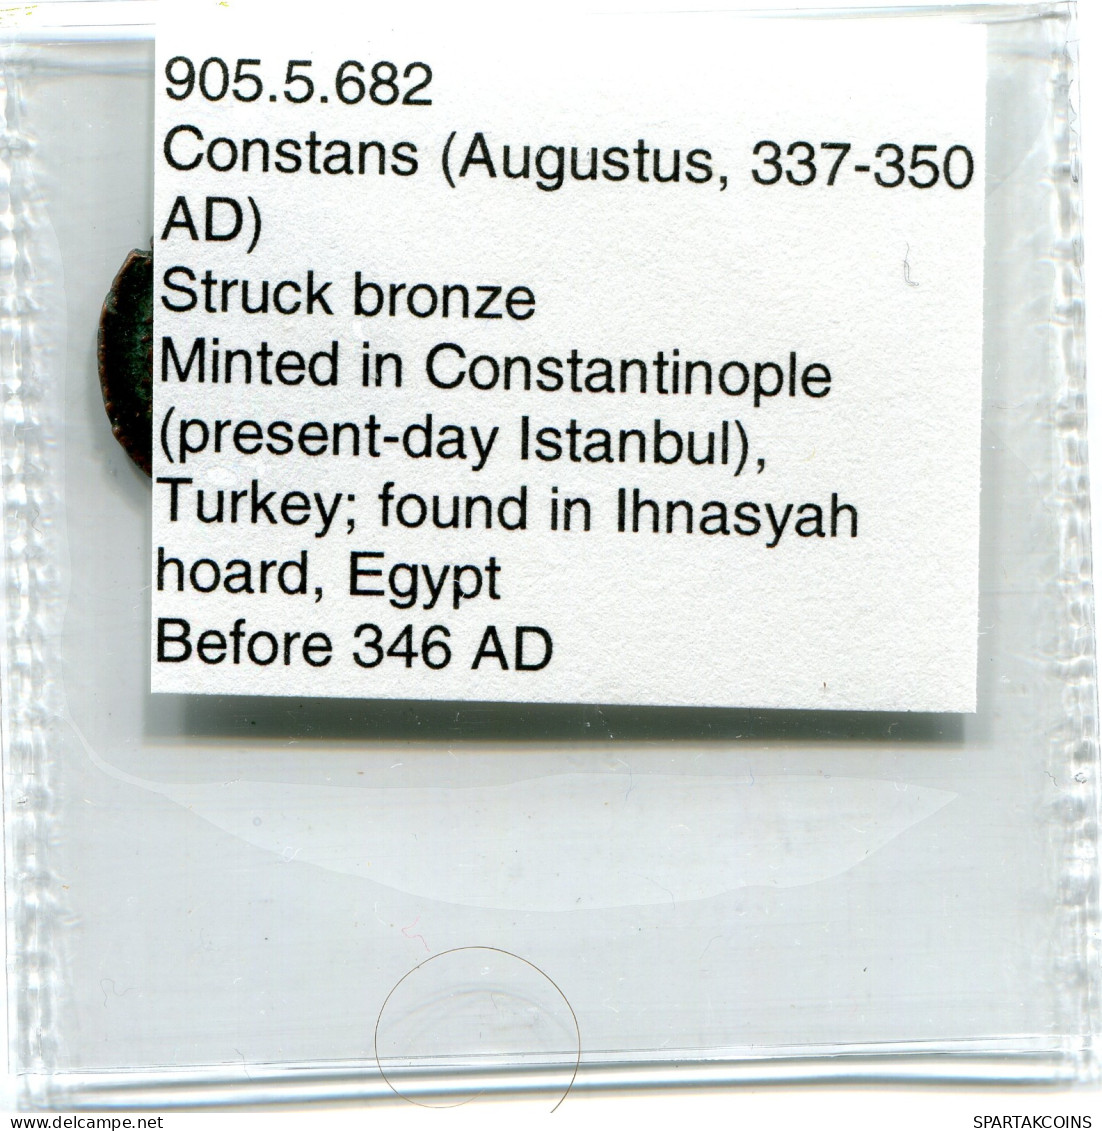 CONSTANS MINTED IN CONSTANTINOPLE FOUND IN IHNASYAH HOARD EGYPT #ANC11958.14.D.A - El Impero Christiano (307 / 363)